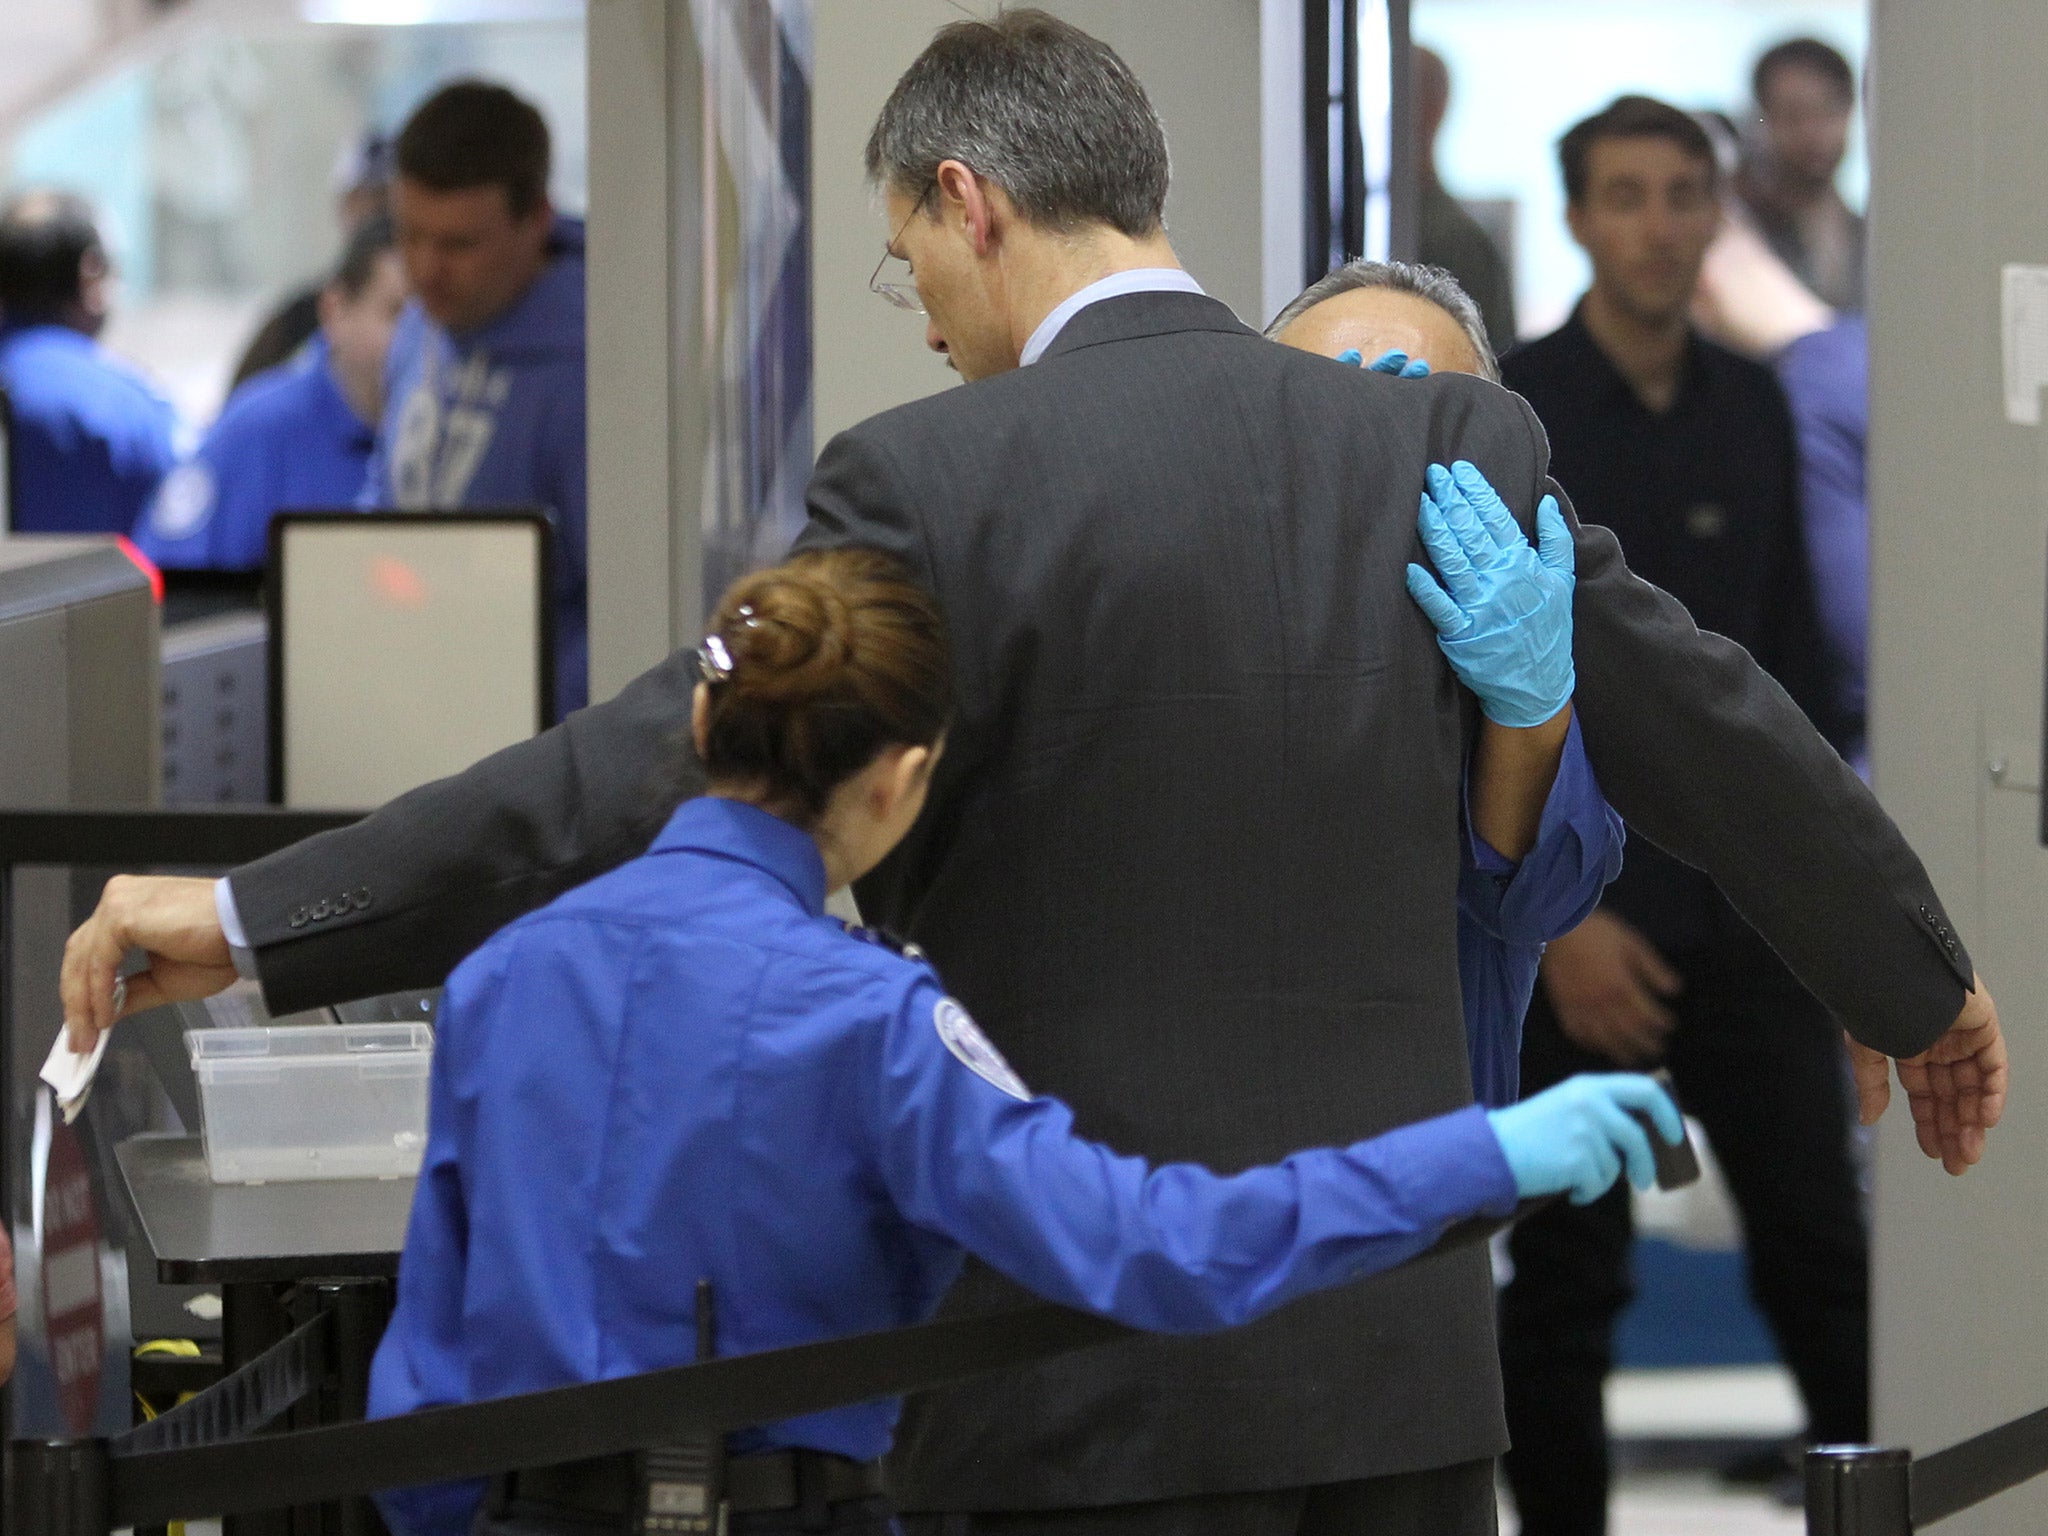 A plane passenger is patted down after passing through a full-body scanner at Los Angeles International Airport